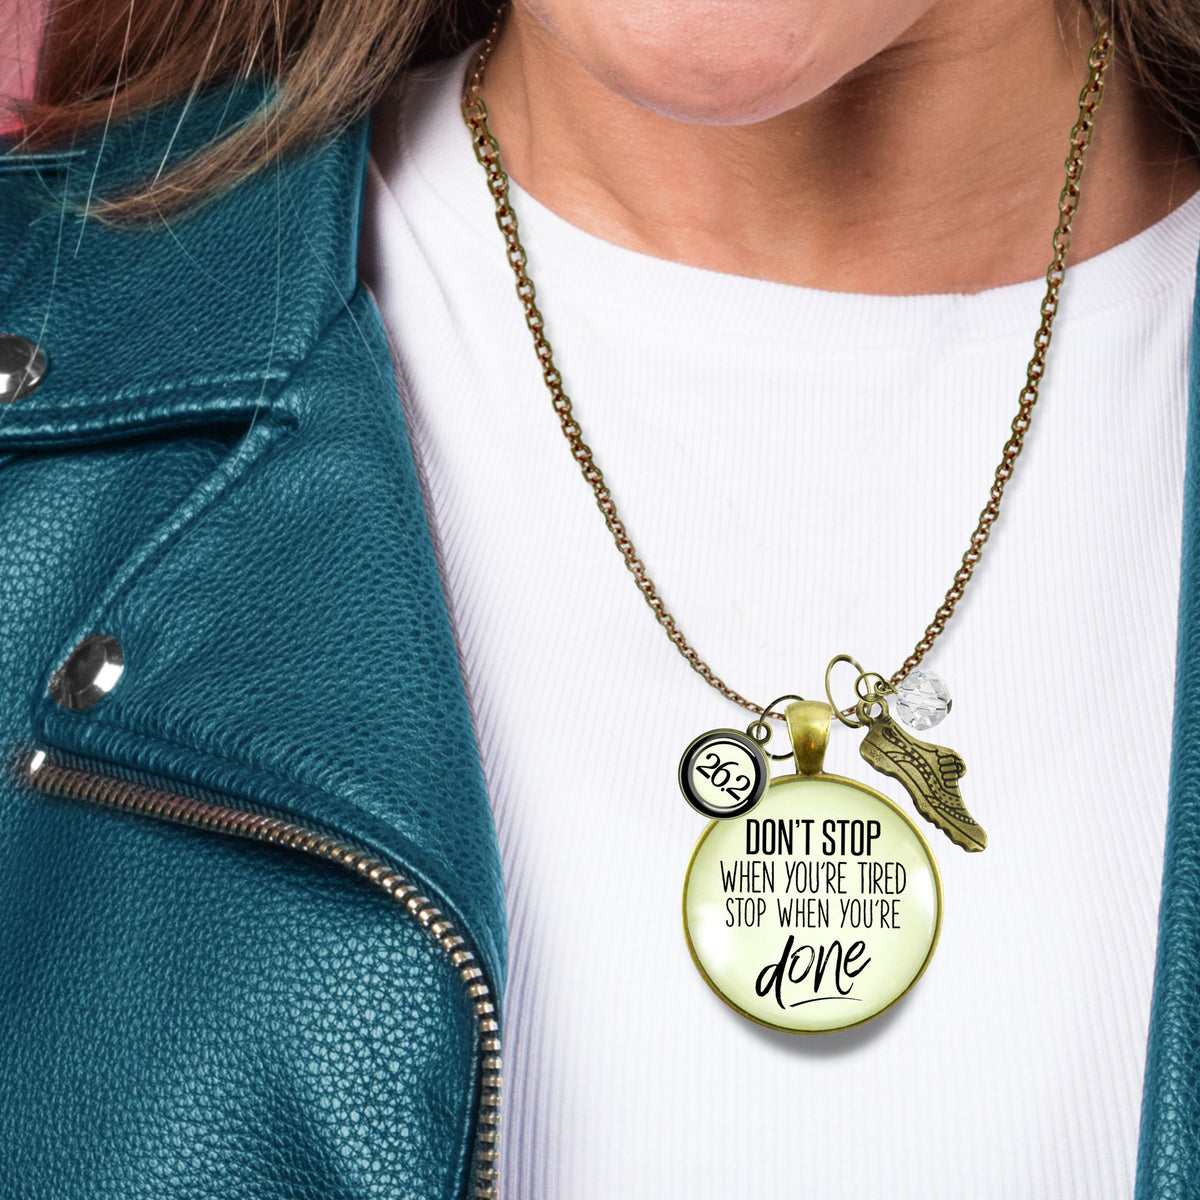 26.2 Marathon Necklace Don't Stop When You're Tired Motivational Run Sport Charm  Necklace - Gutsy Goodness Handmade Jewelry